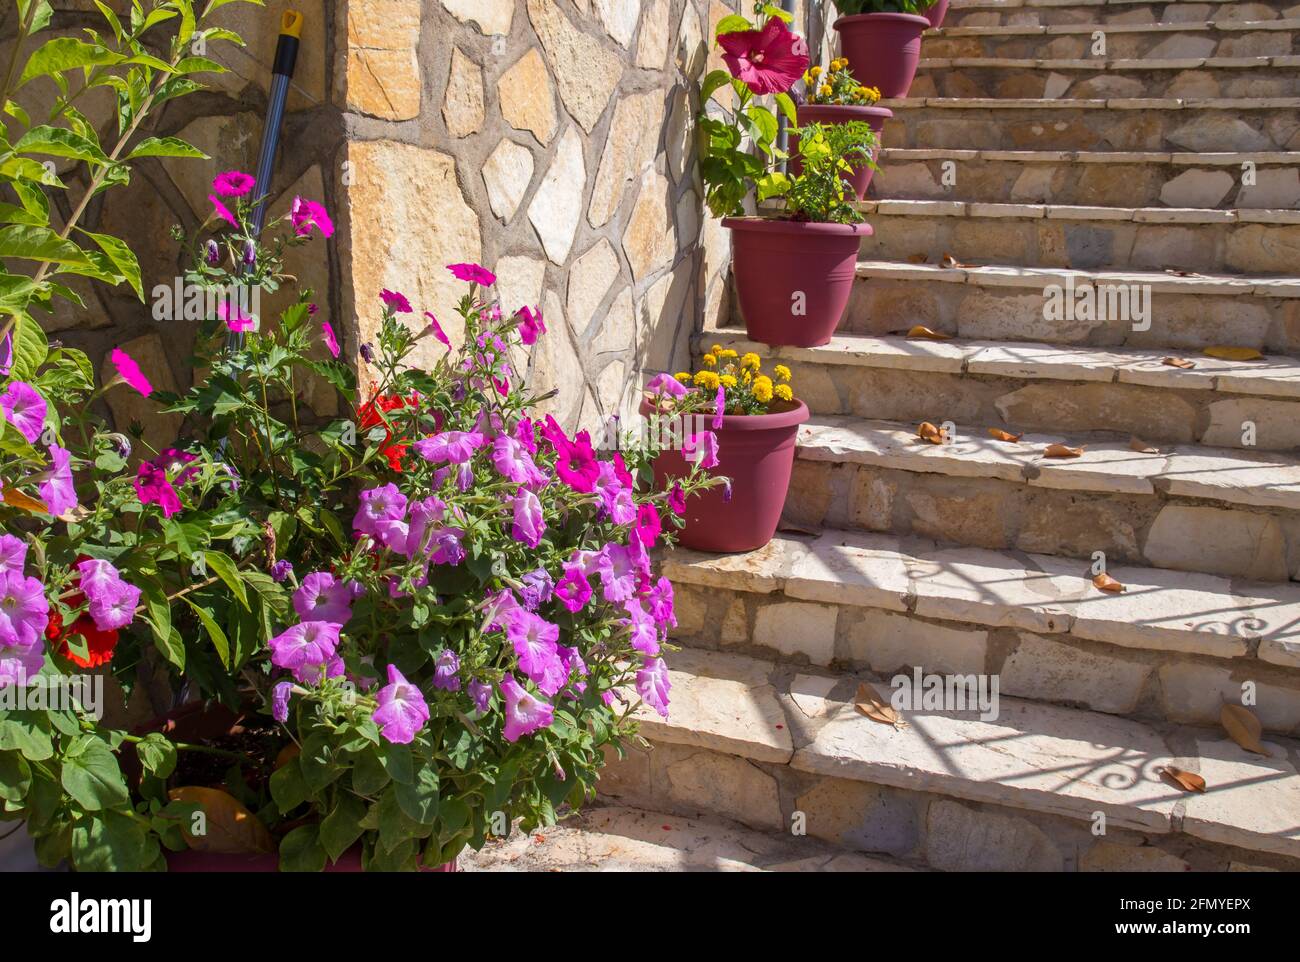 Stone stairs in Greece with flowers. Summertime concept Stock Photo